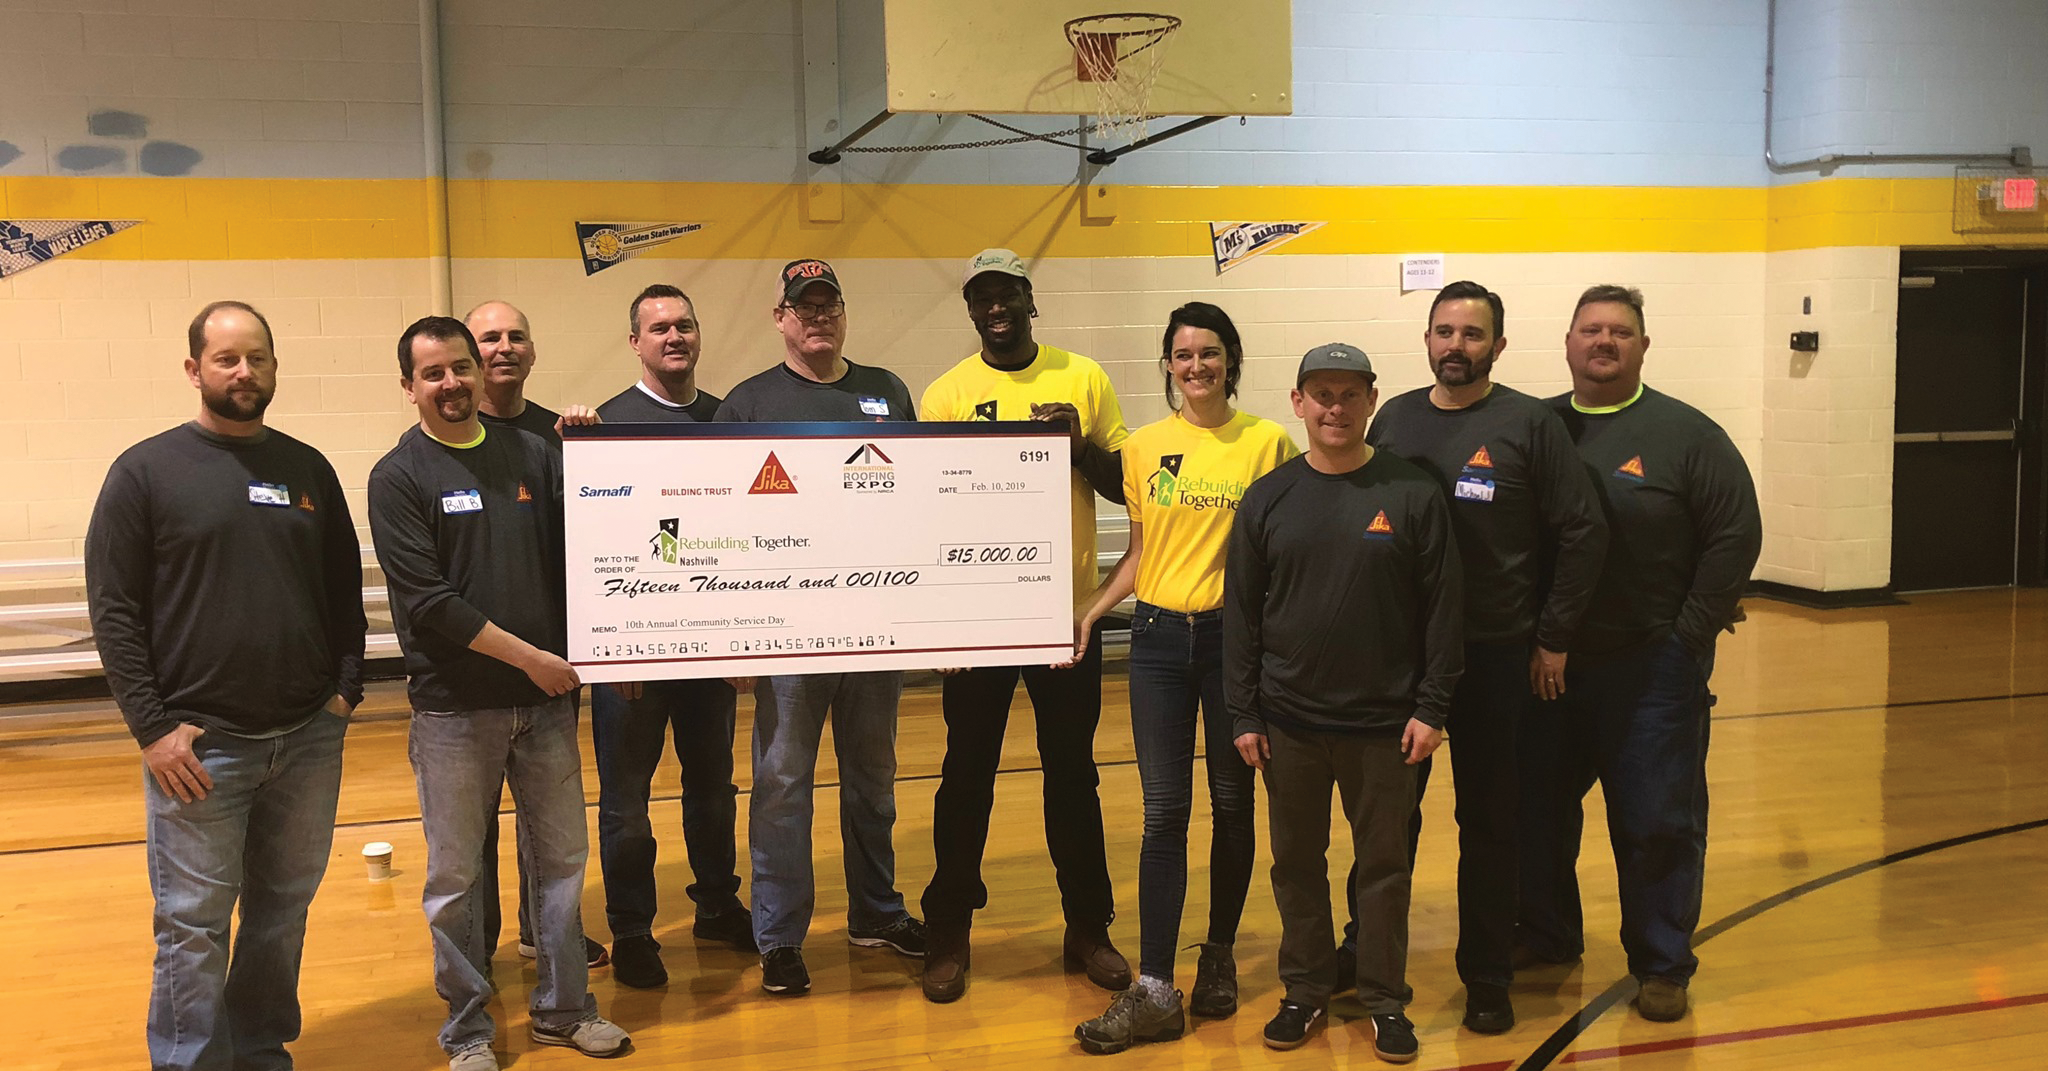 Sika Sarnafil celebrates its tenth year supporting the International Roofing Expo and Rebuilding Together’s annual community service day.